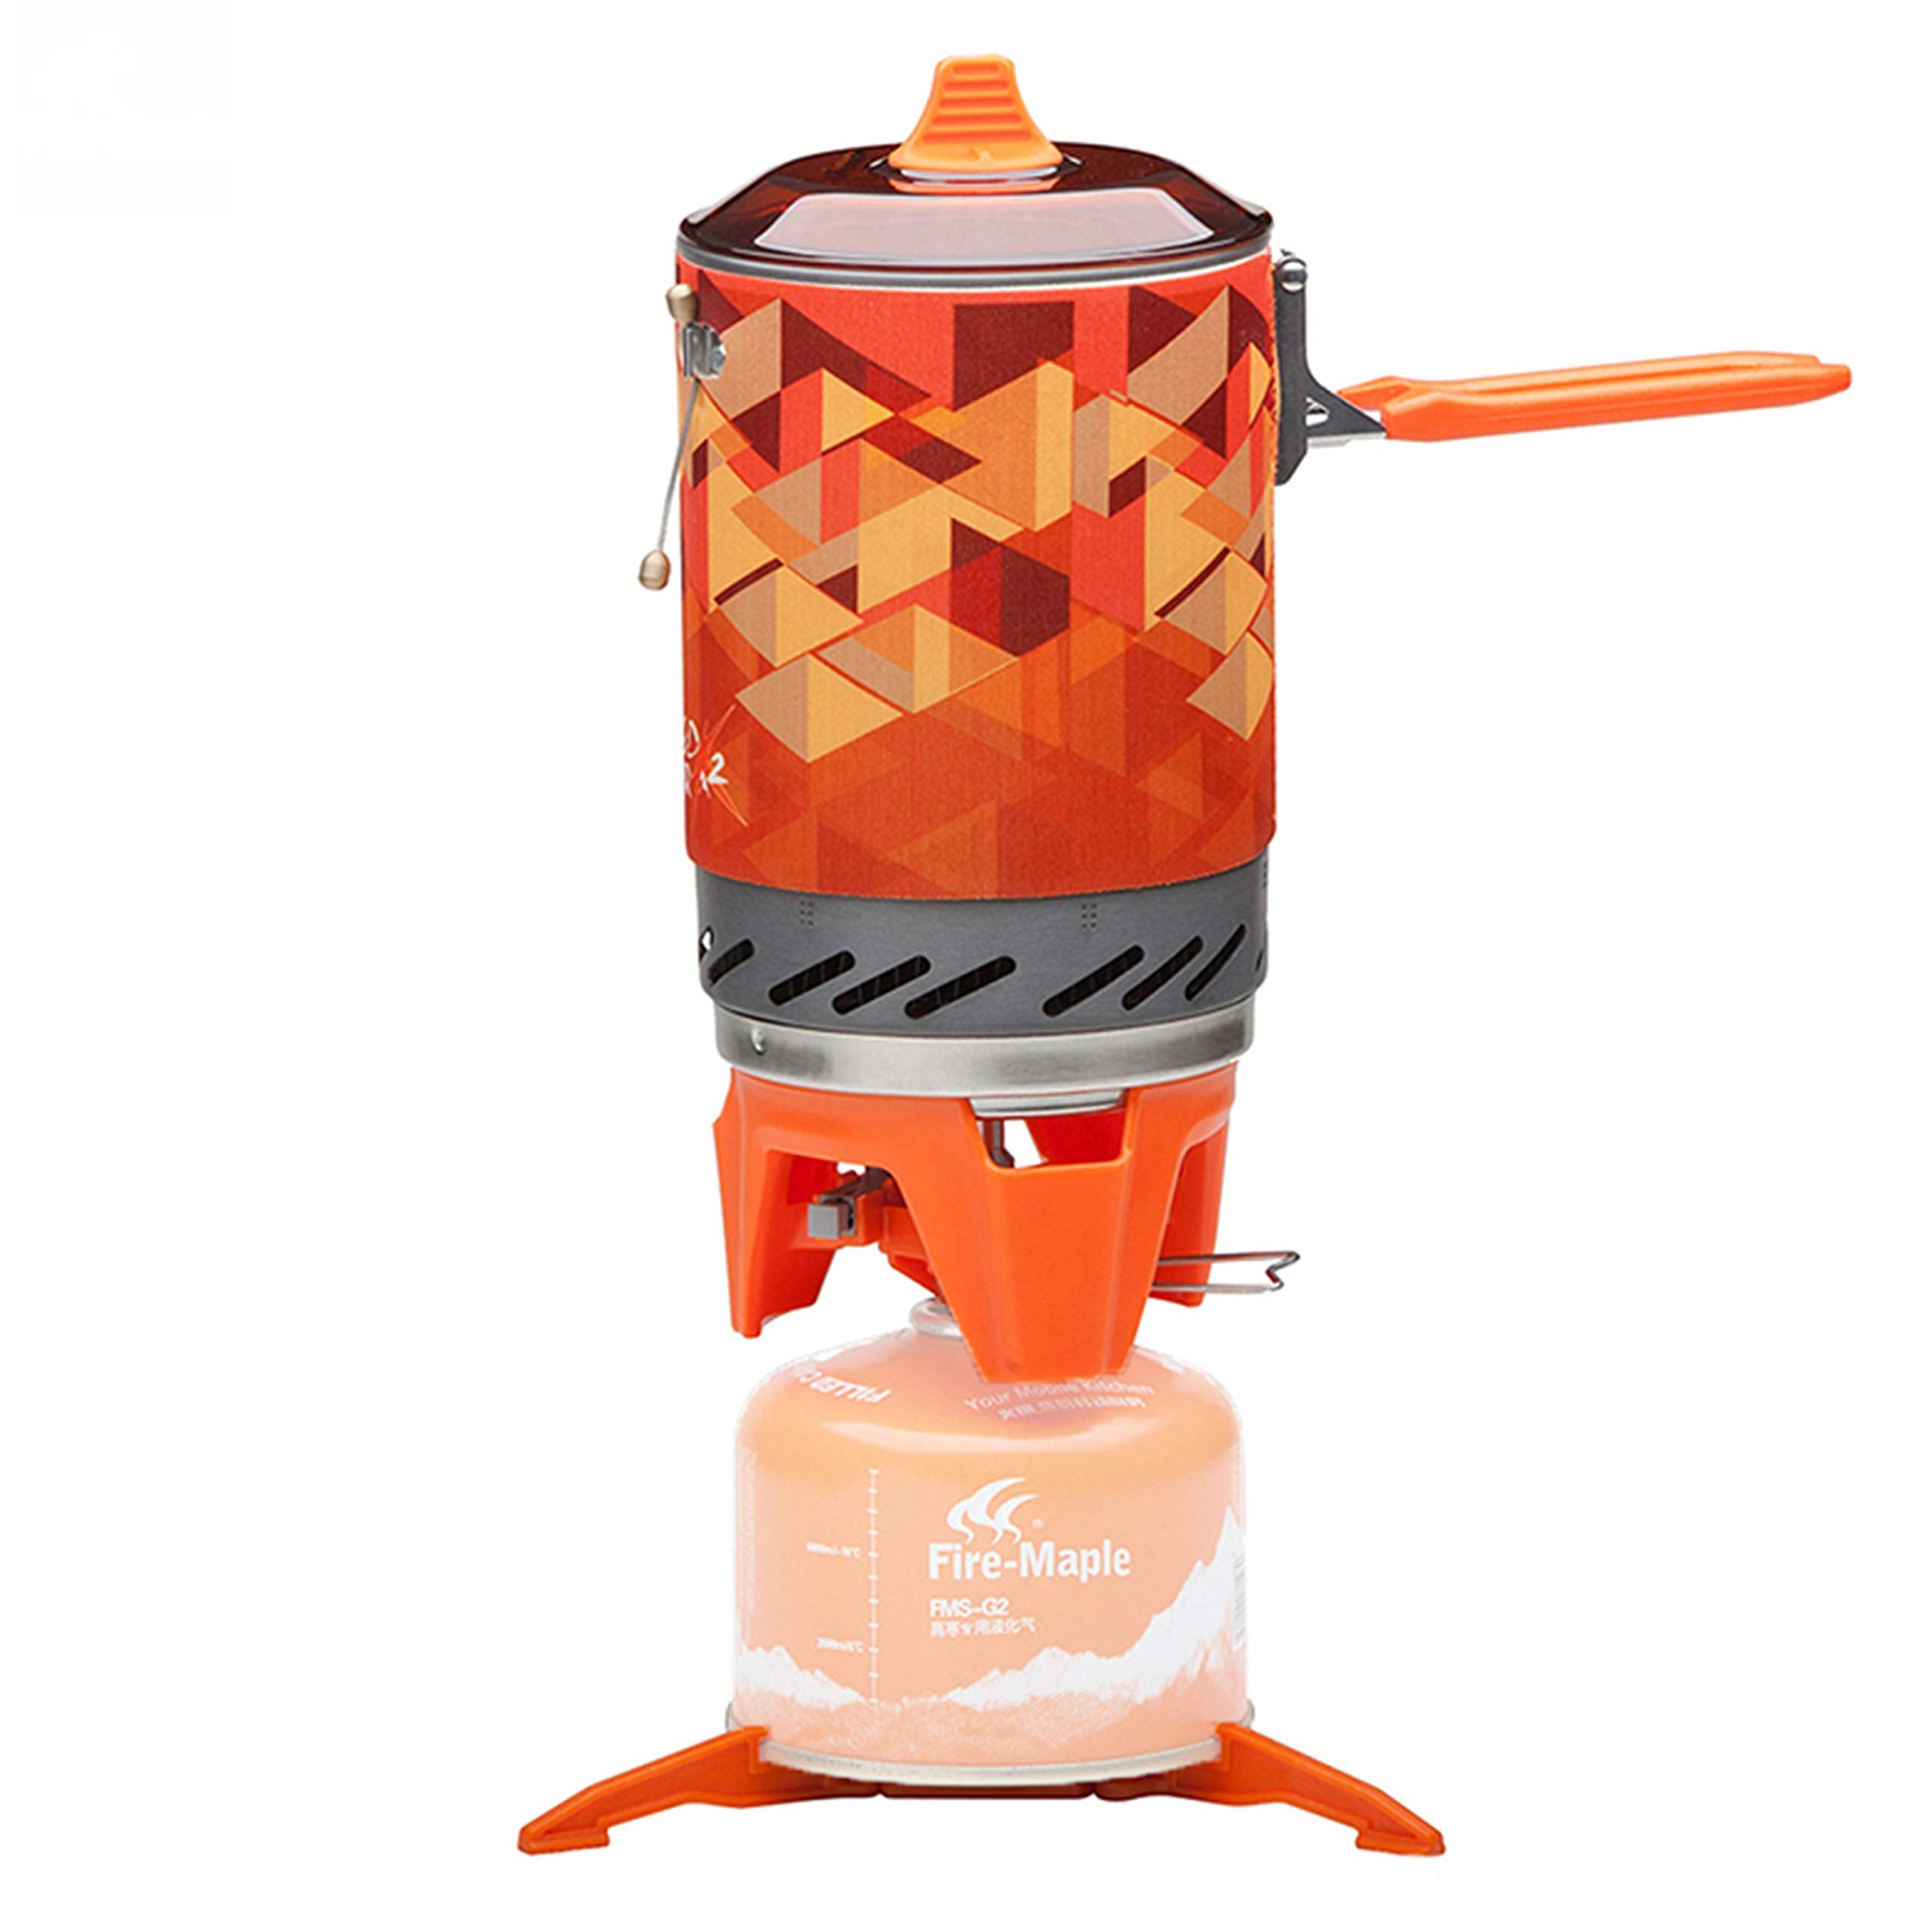 Fire-Maple FMS-X2 Camping Stove Gas System | Portable Pot / Jet Burner Outdoor Gas Cooking Essentials | Compact Equipment for Hiking Trekking Backpacking Fishing Hunting Bushcraft